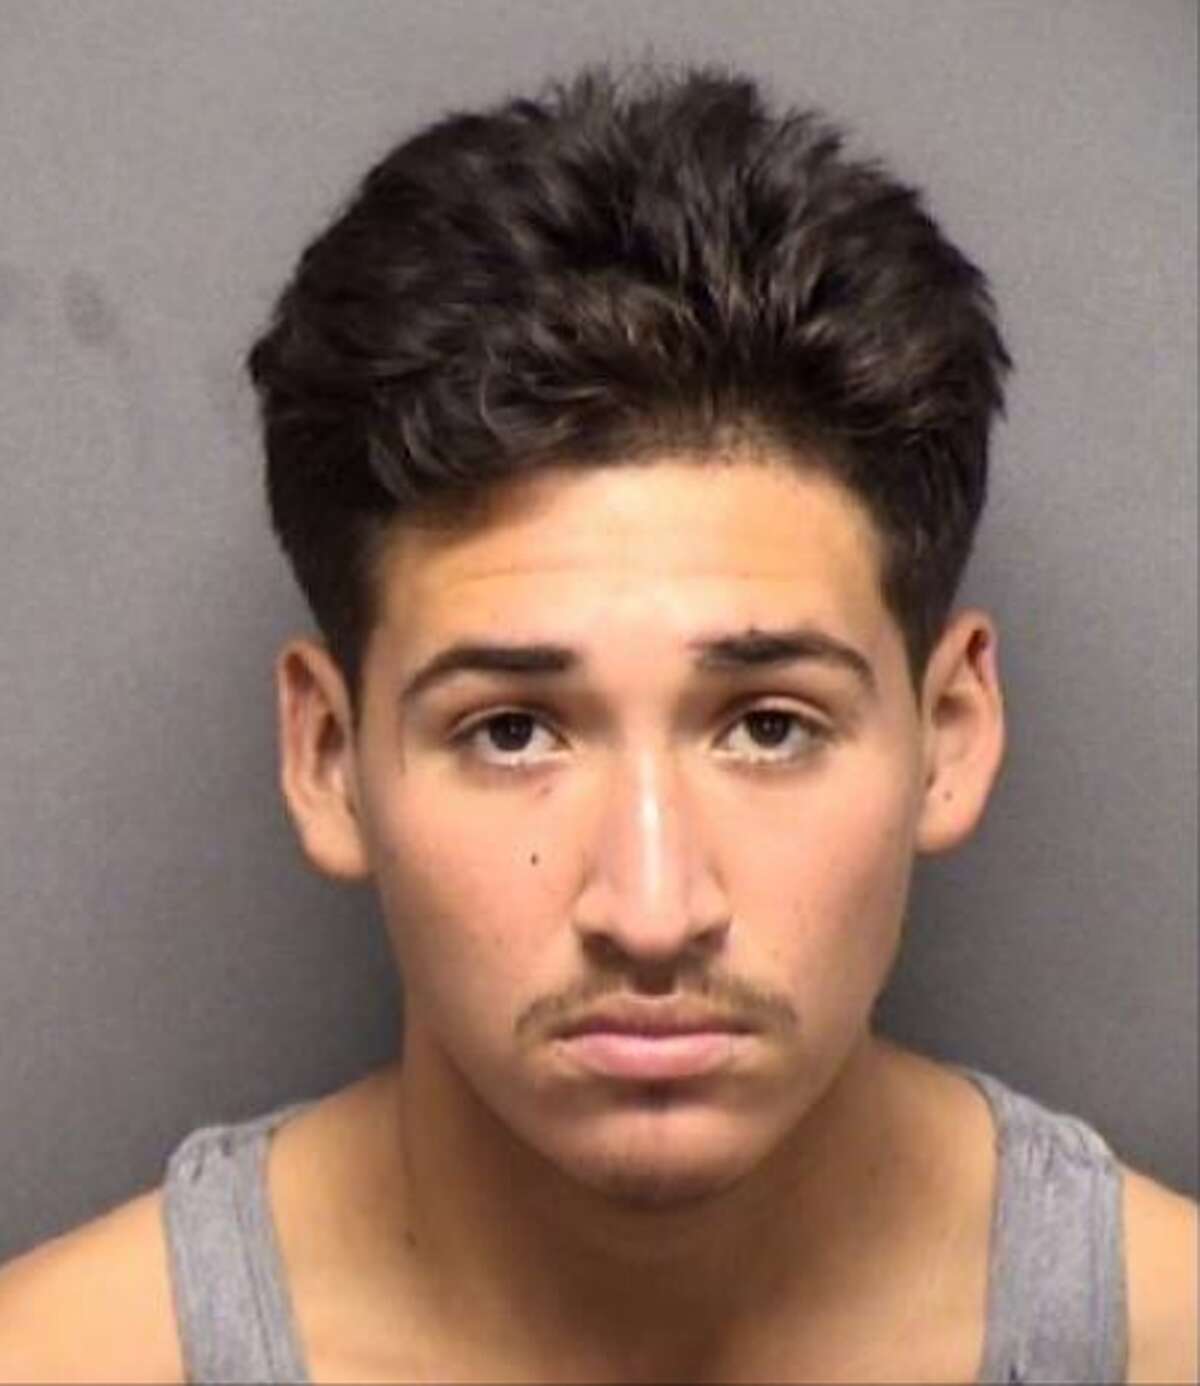 Julio Rivera, 18, has been charged with three counts of aggravated robbery in two separate attempted carjackings.